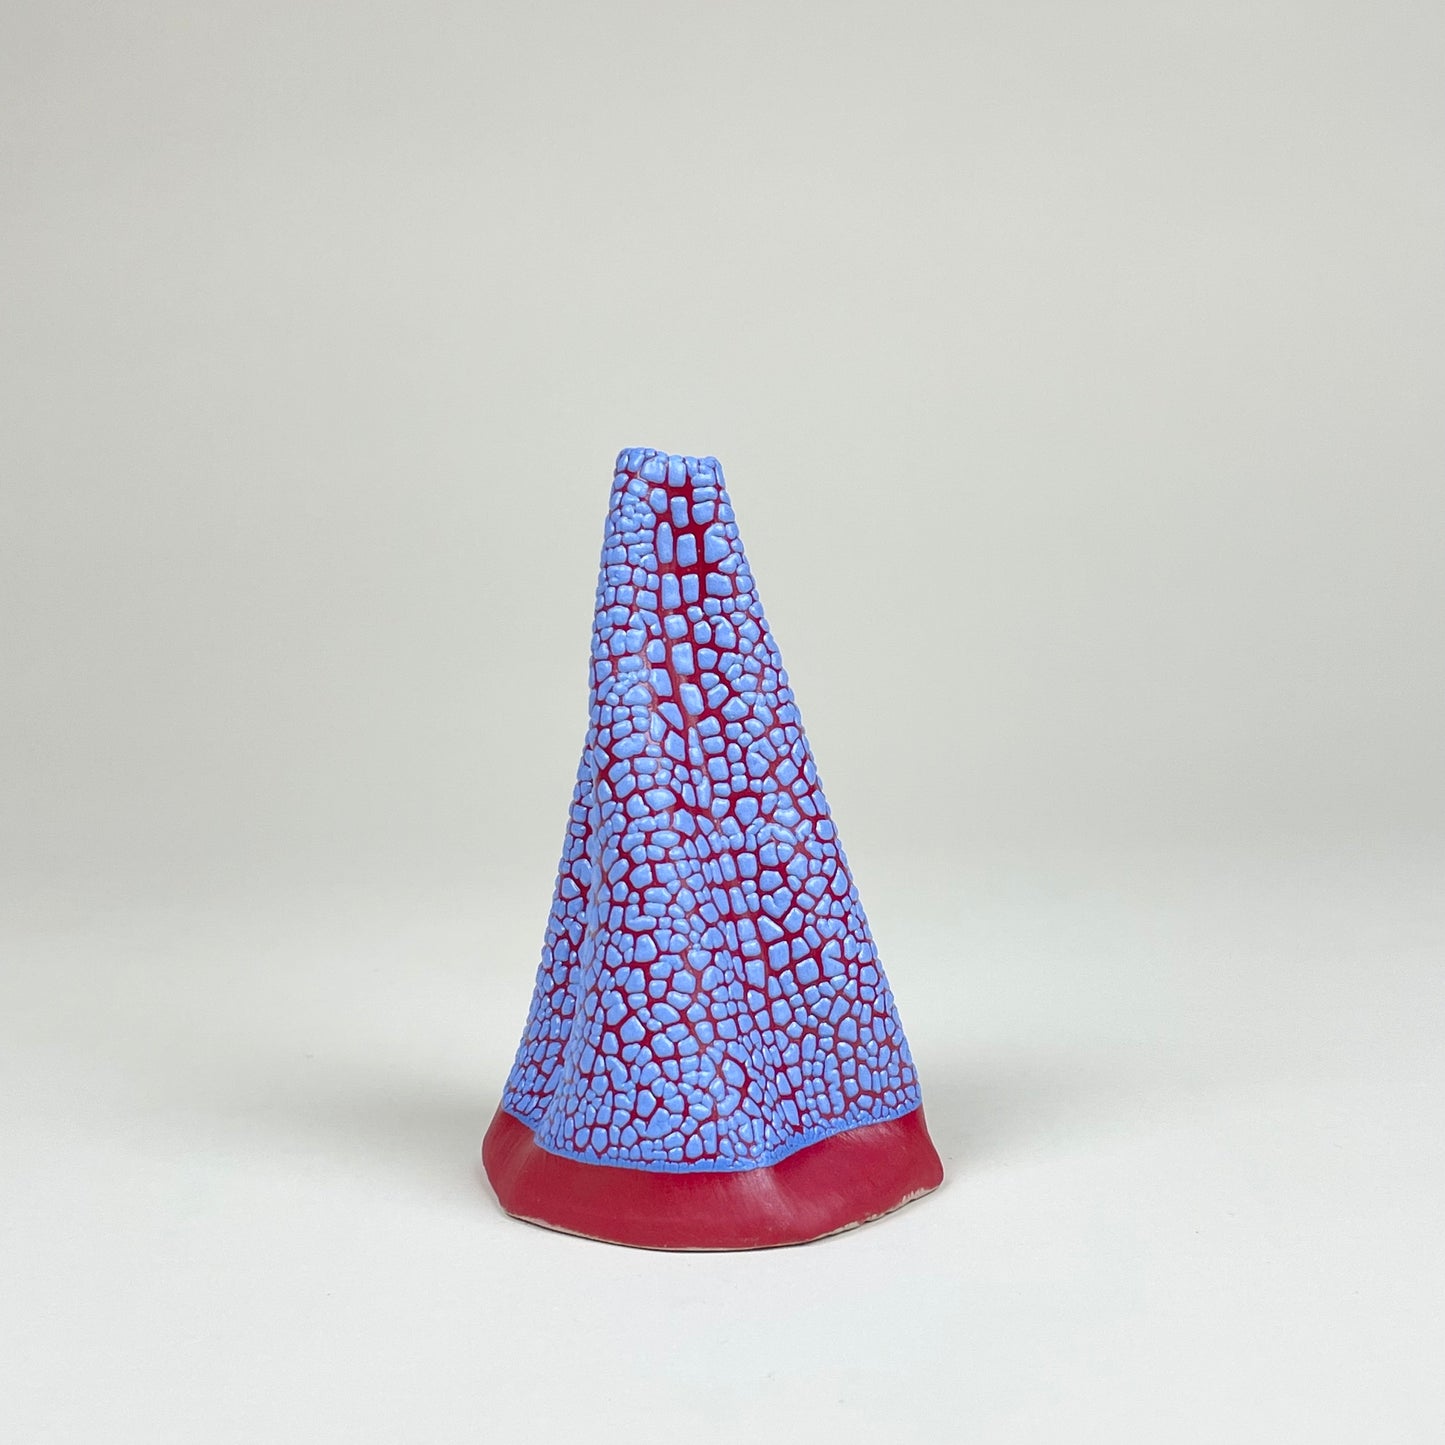 Red and blue volcano vase (L) by Astrid Öhman.